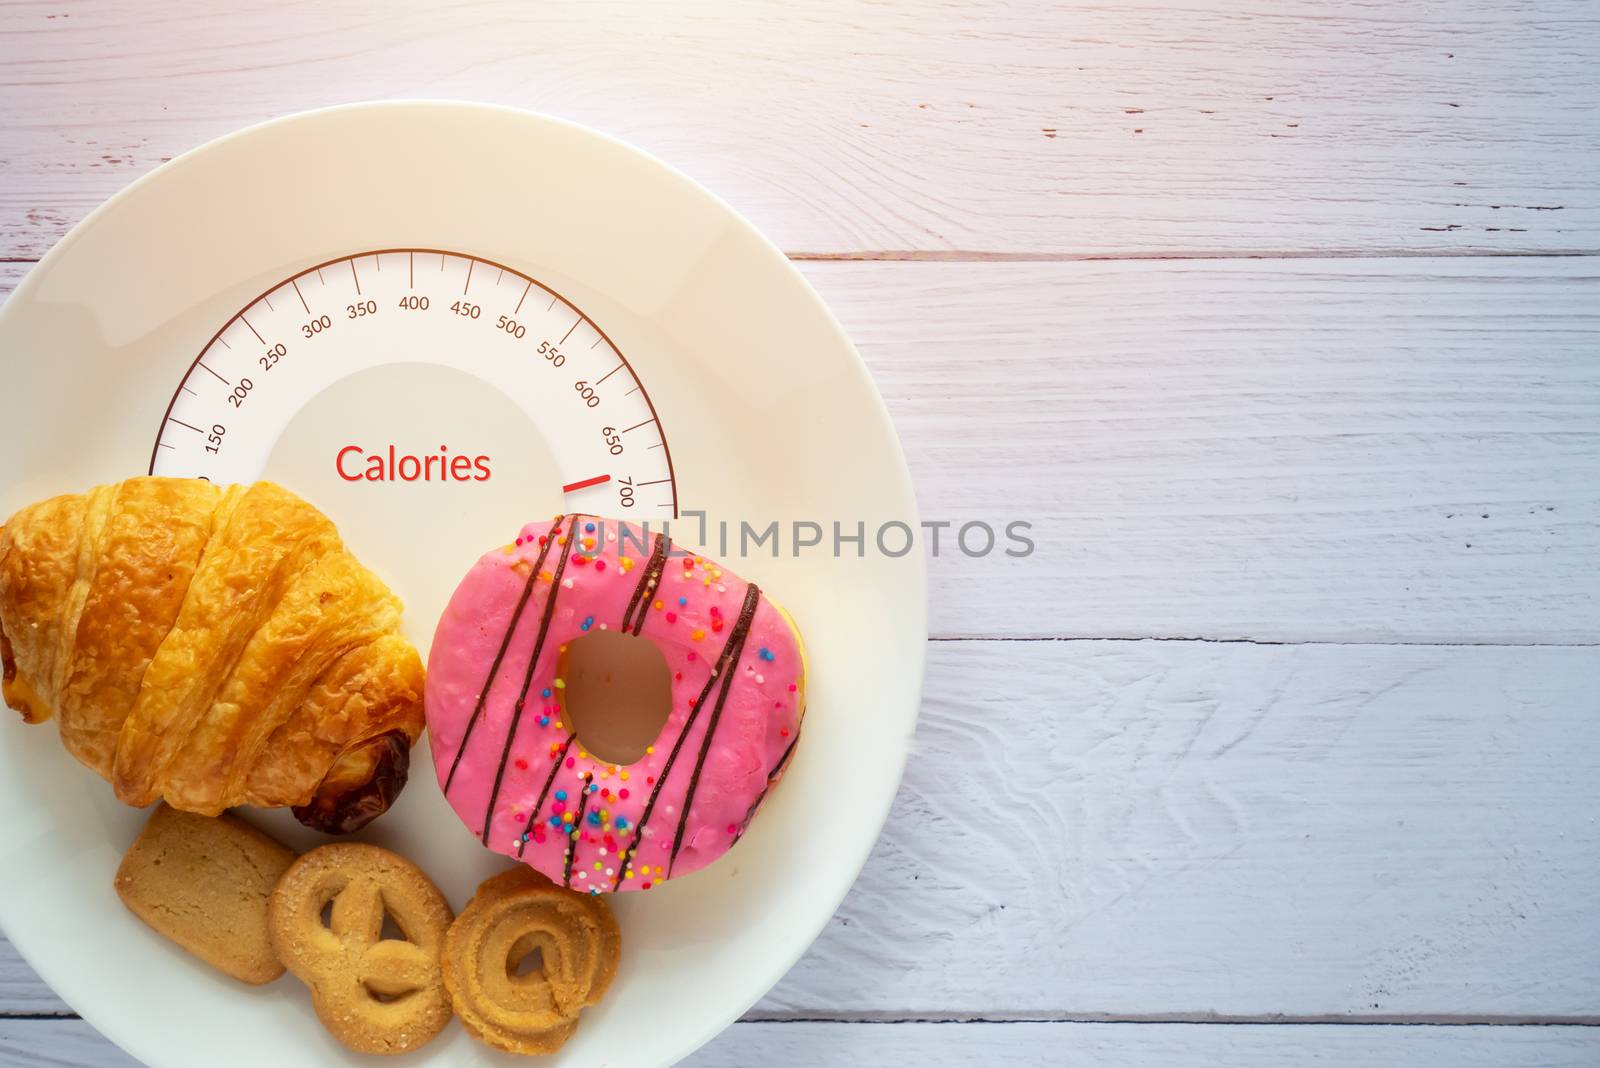 Calories counting and food control concept. doughnut ,croissant and cookies on white plate with tongue scales for Calories measuring by asiandelight